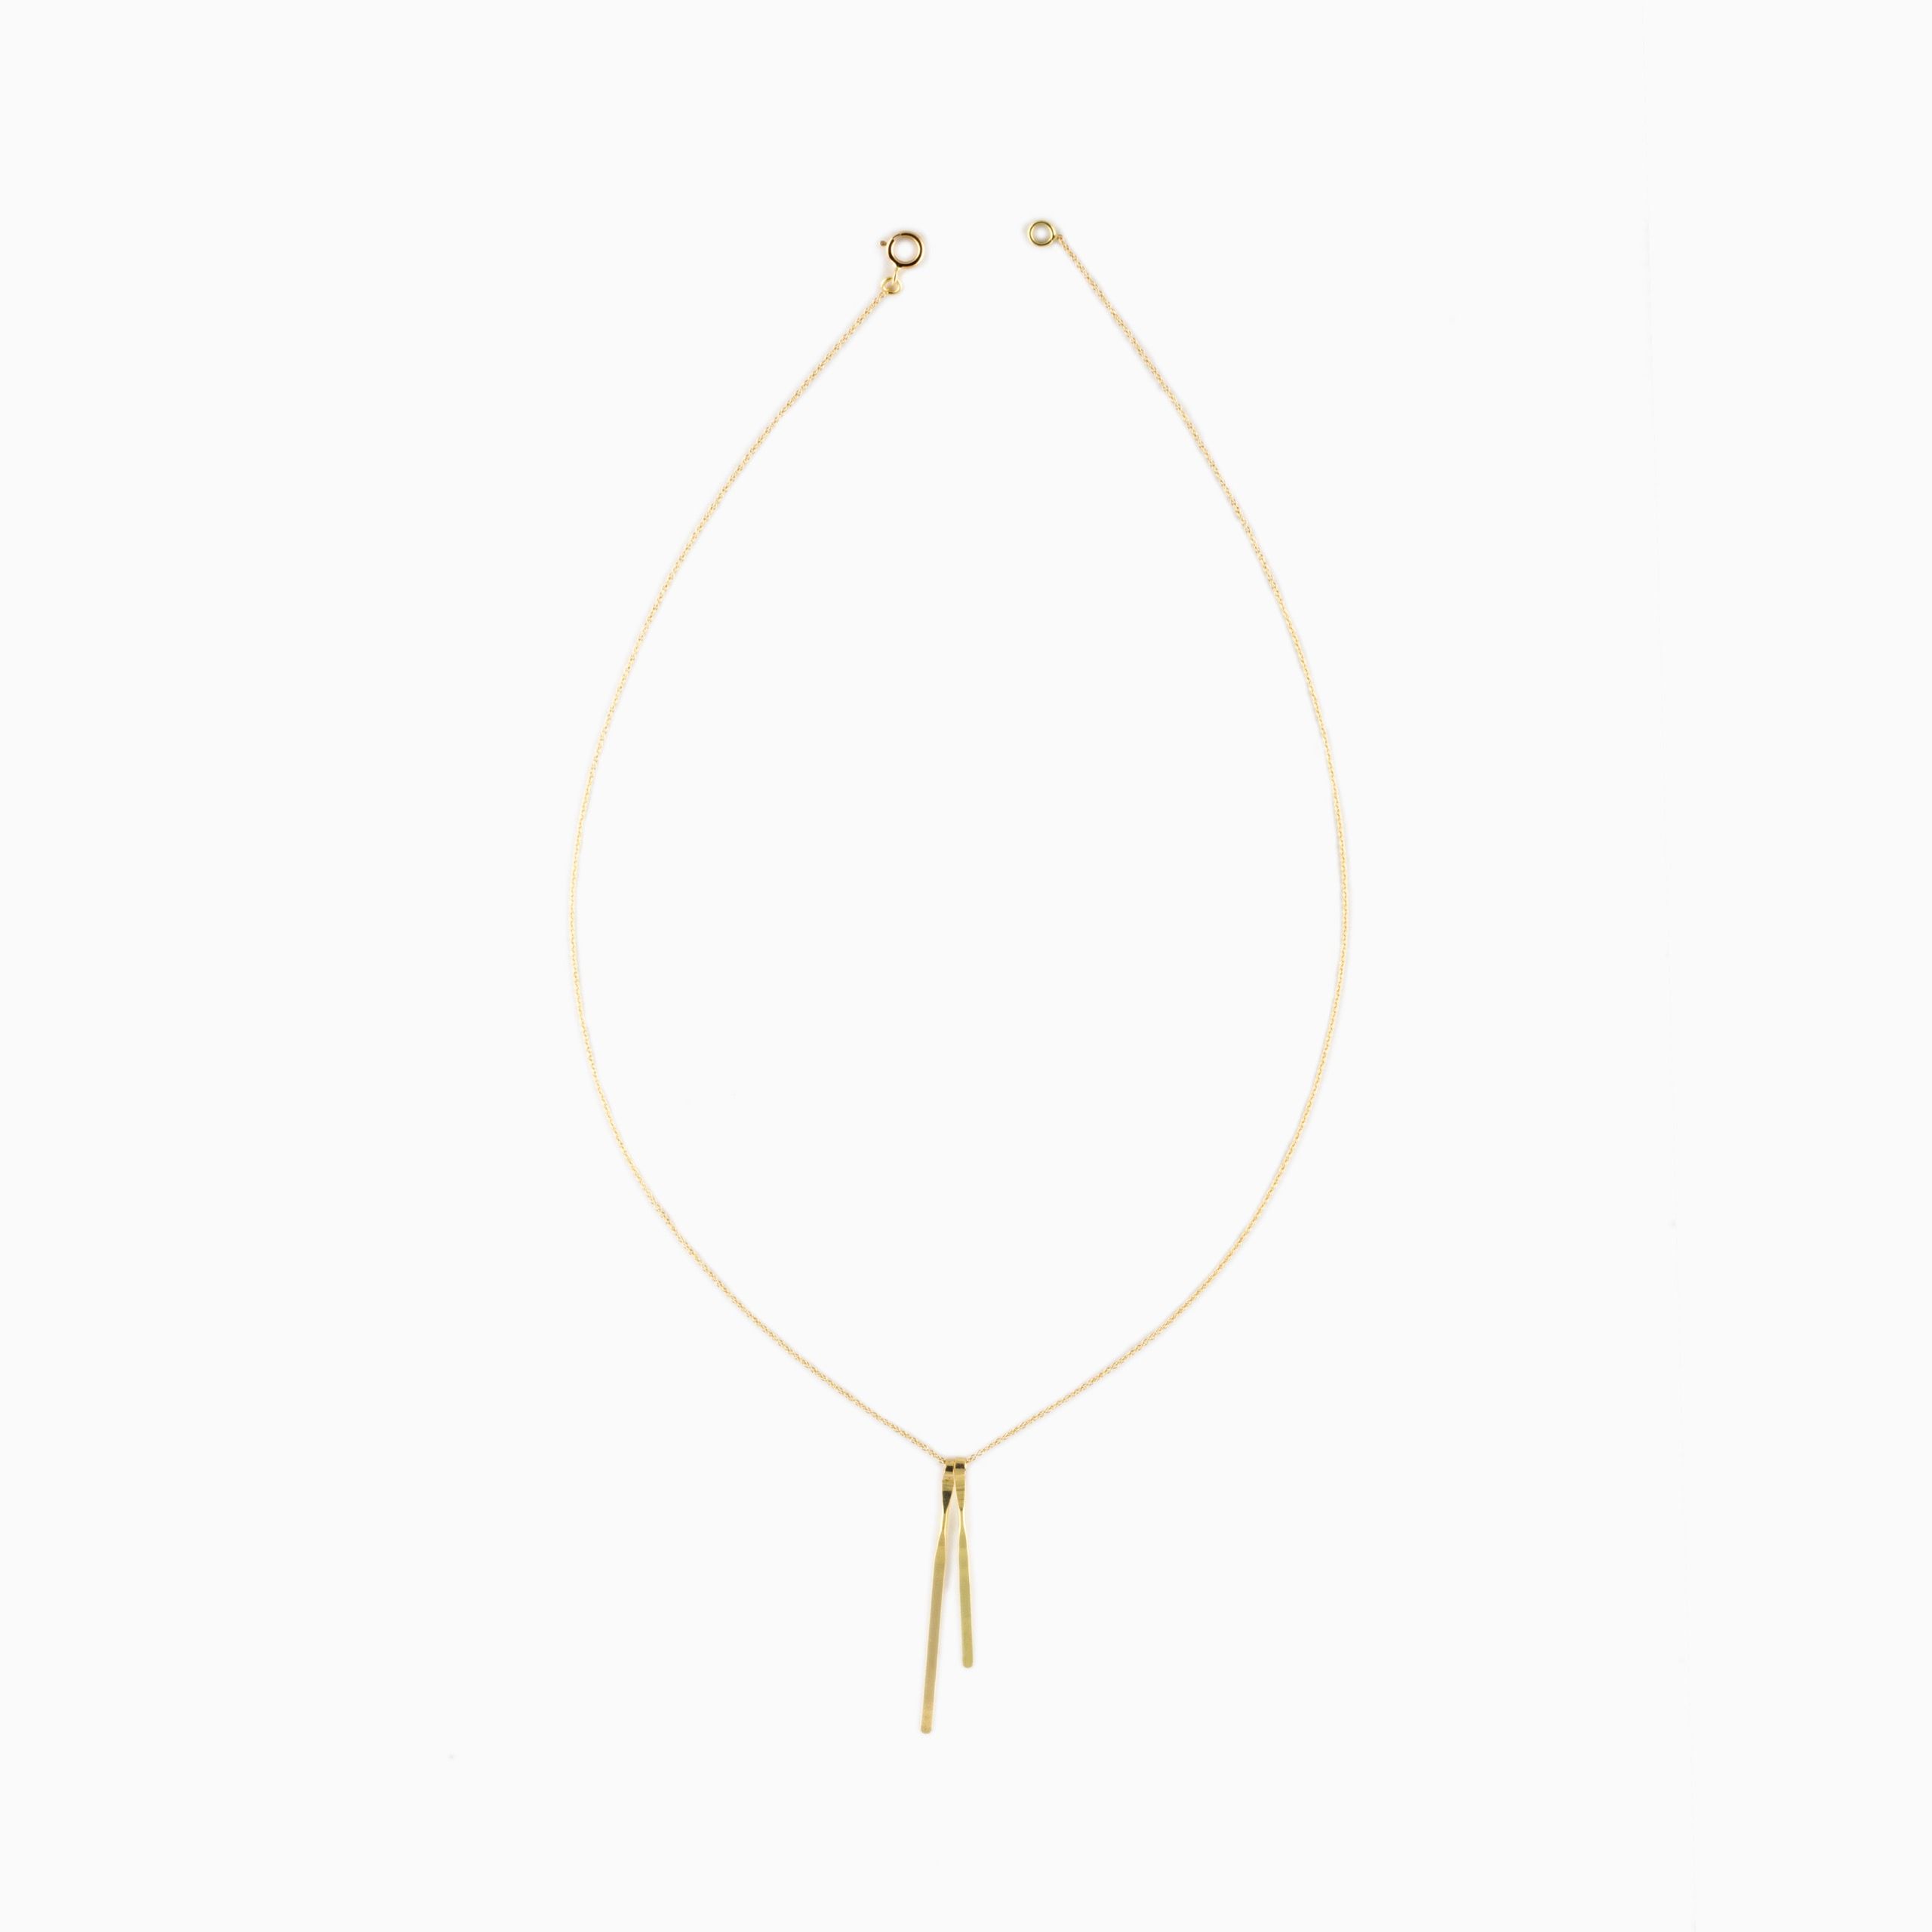 Two Line Necklace And Chain In 18 Carat Yellow Gold For Latest Geometric Lines Necklaces (View 9 of 25)